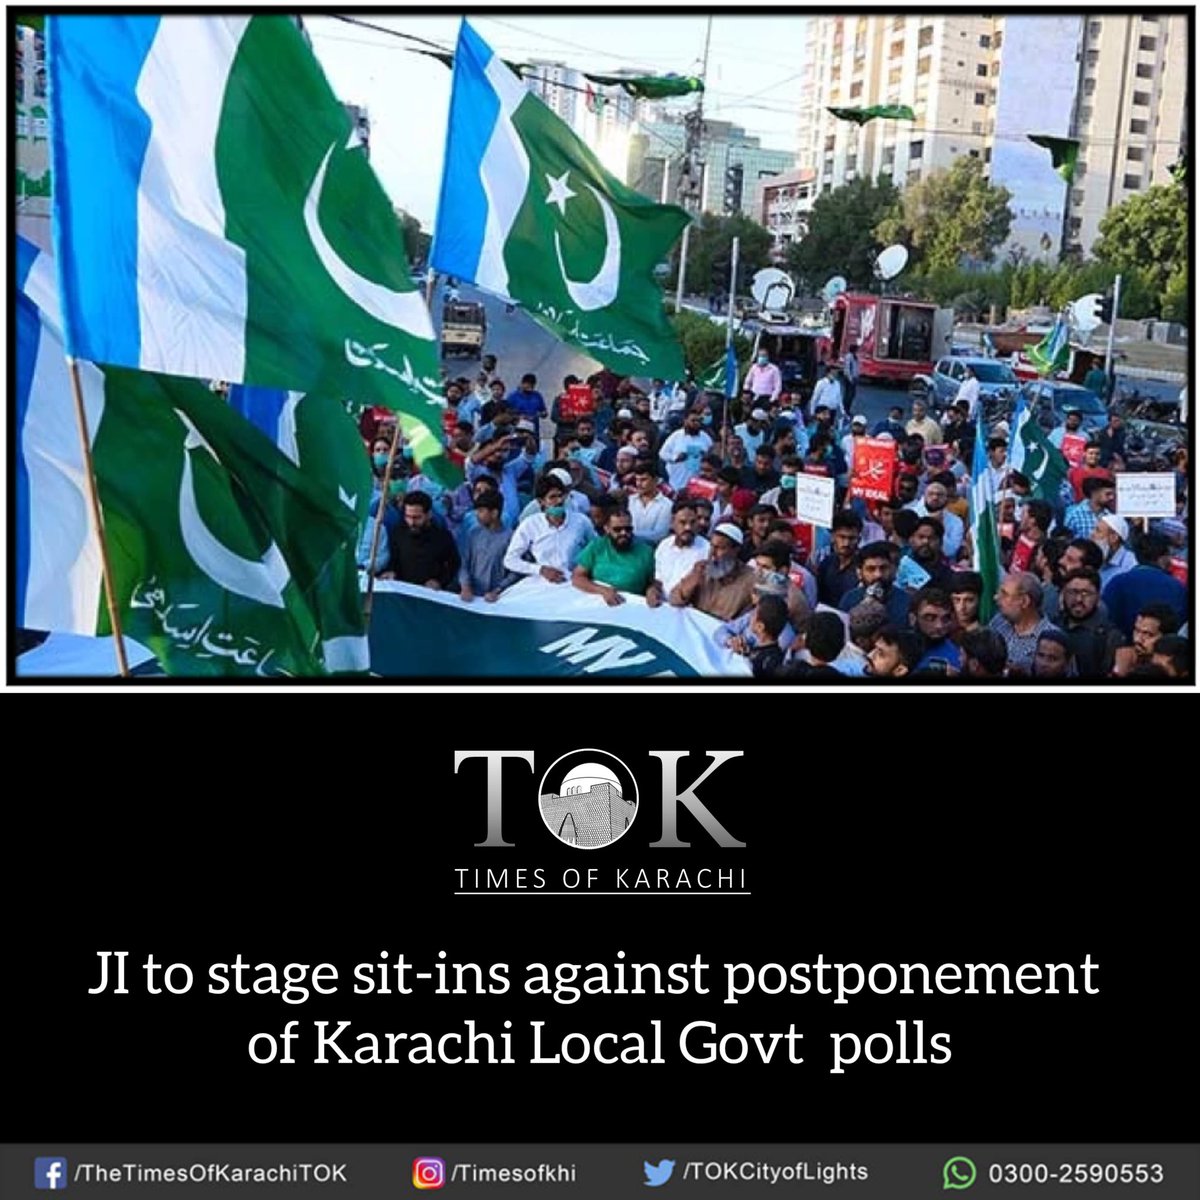 JUST IN: Jamaat-e-Islami (JI) has announced to hold sit-ins in different parts of Karachi today against the postponement of #Karachi Local Government (LG) polls for the third time. #TOKAlert